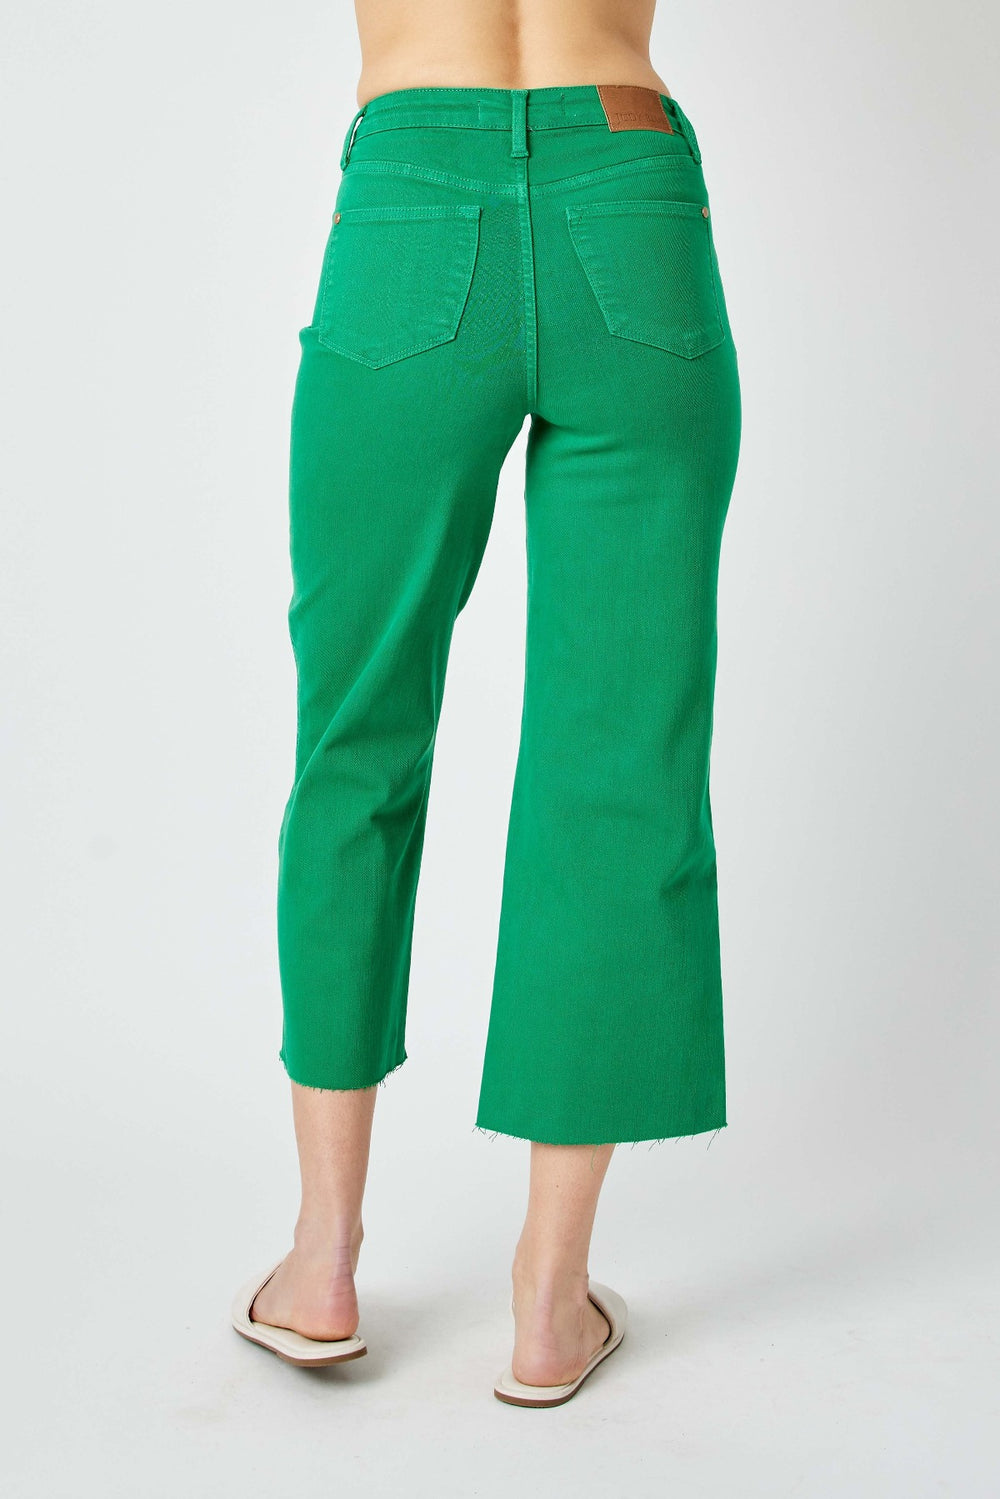 Judy Blue Green Jeans - Wide Leg - Cropped - Inspired Eye Boutique